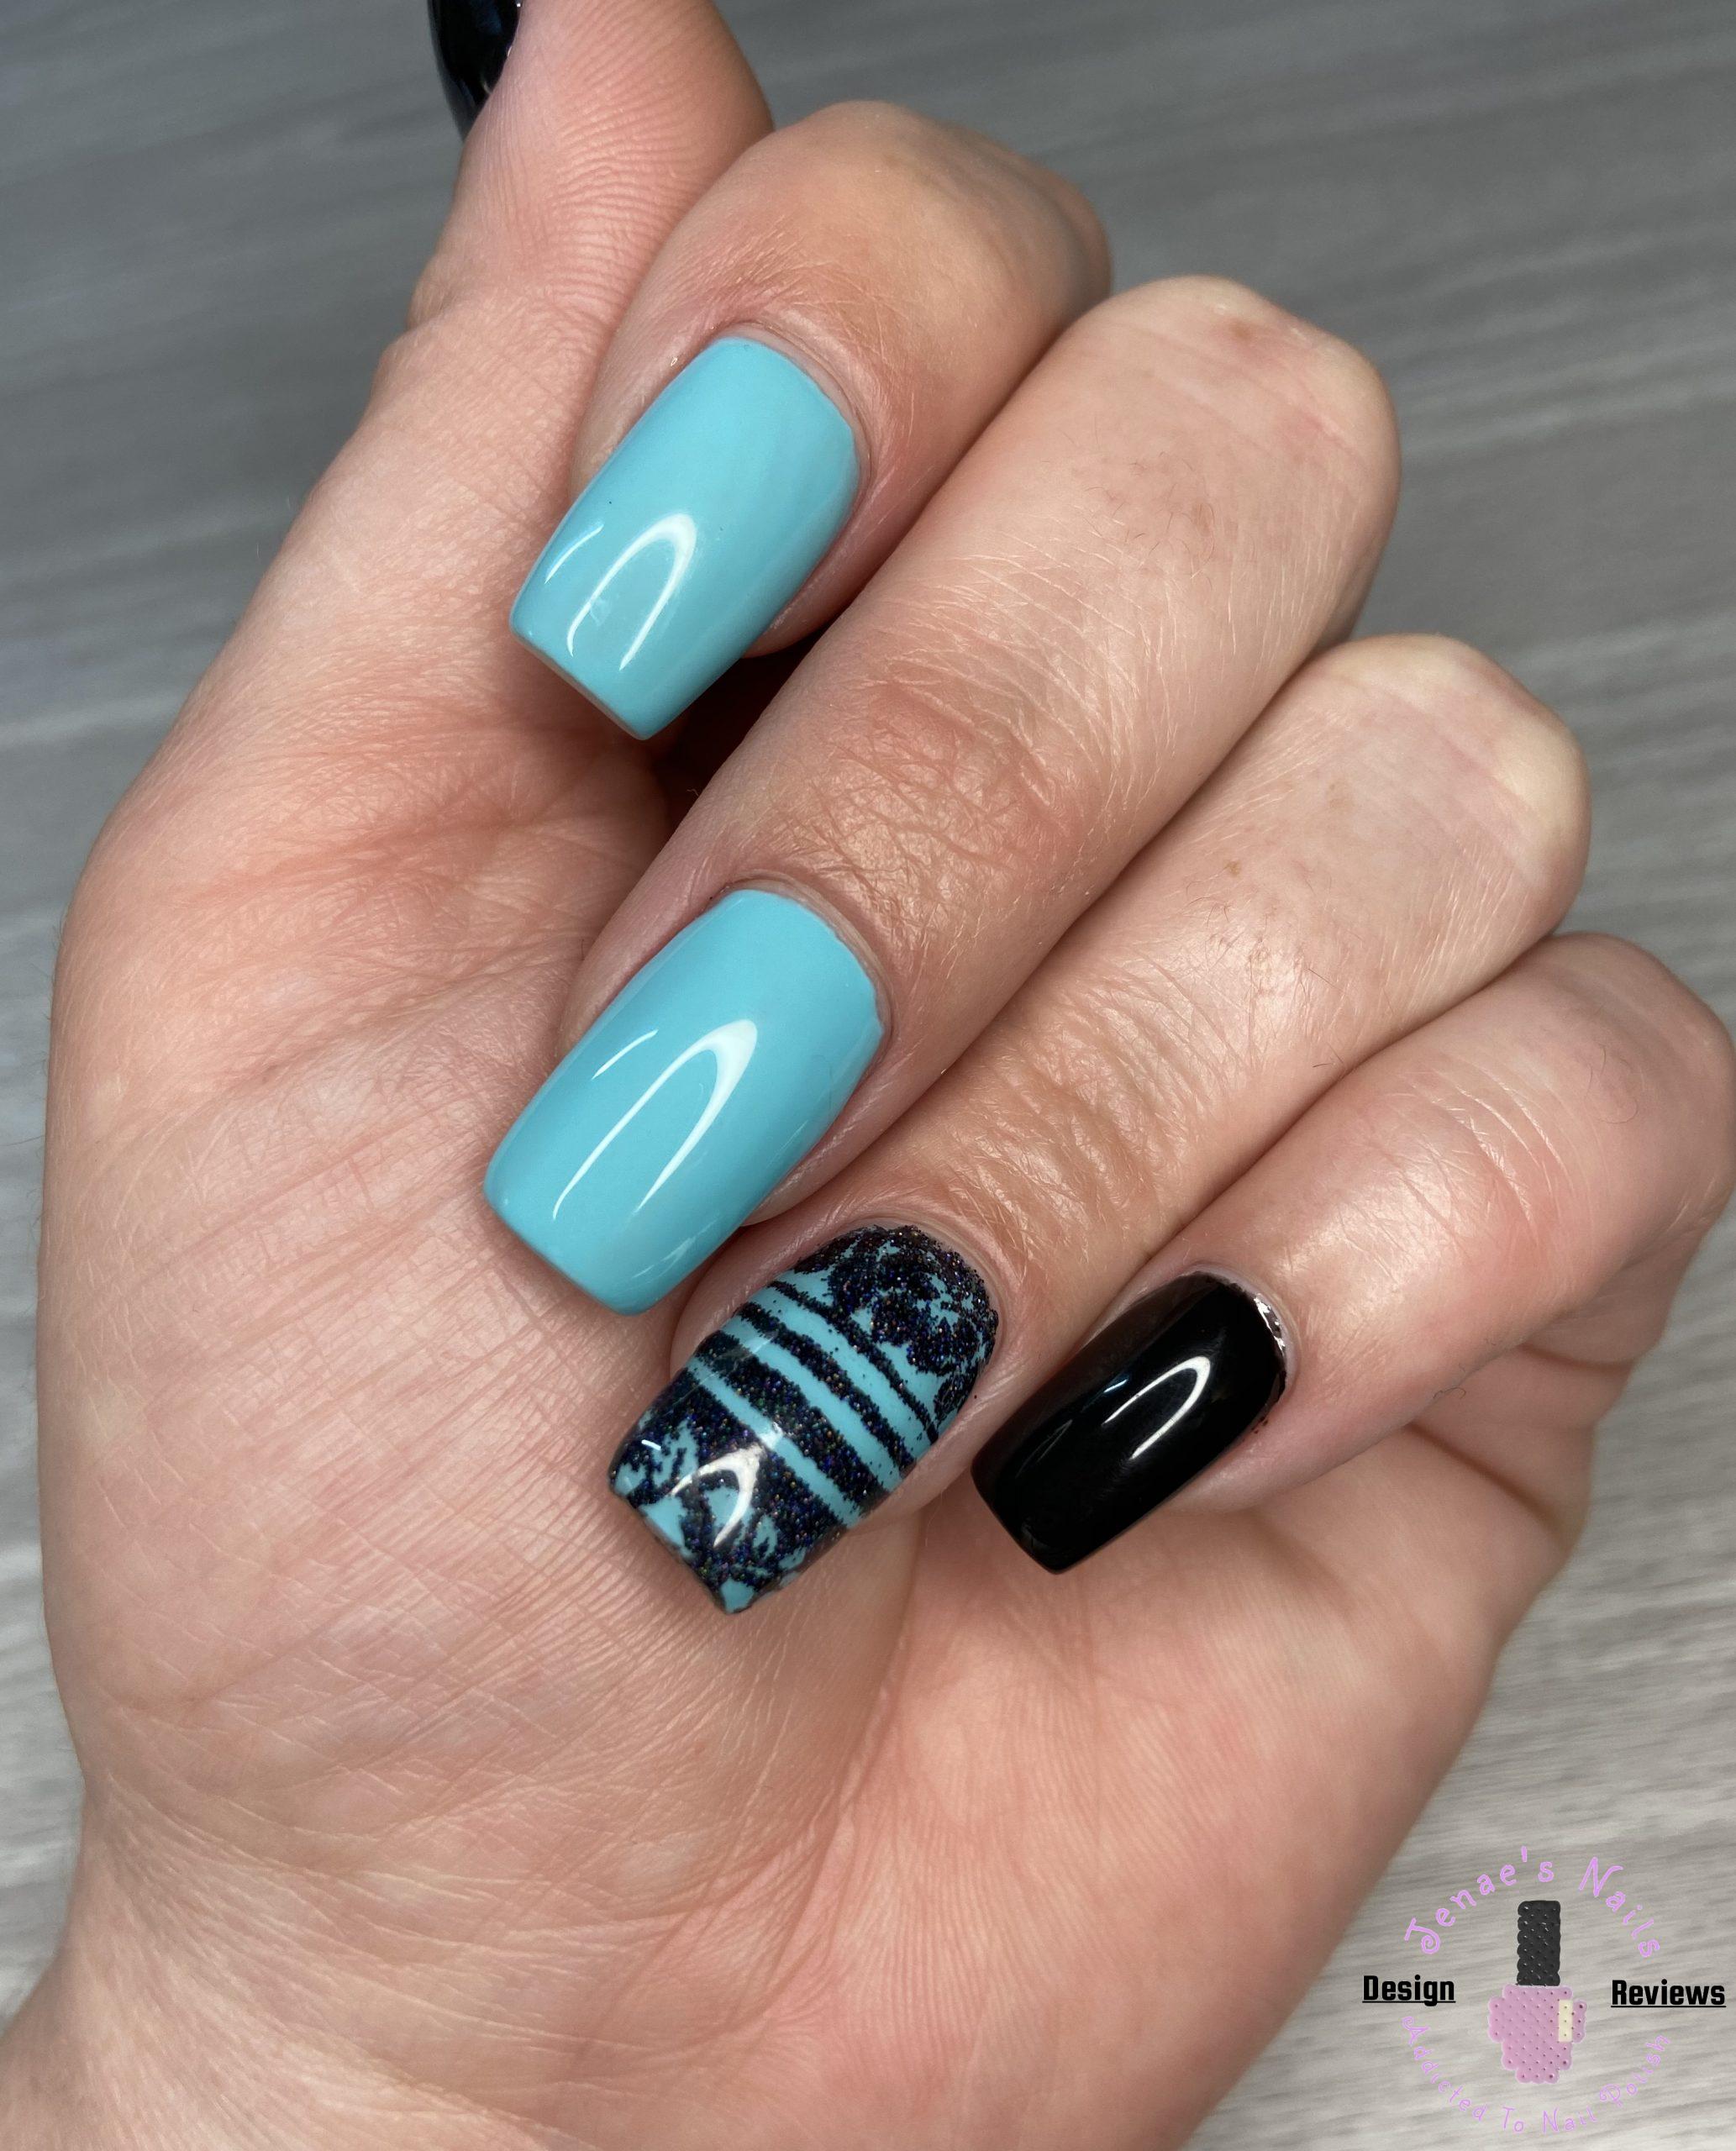 Black and Teal Nails